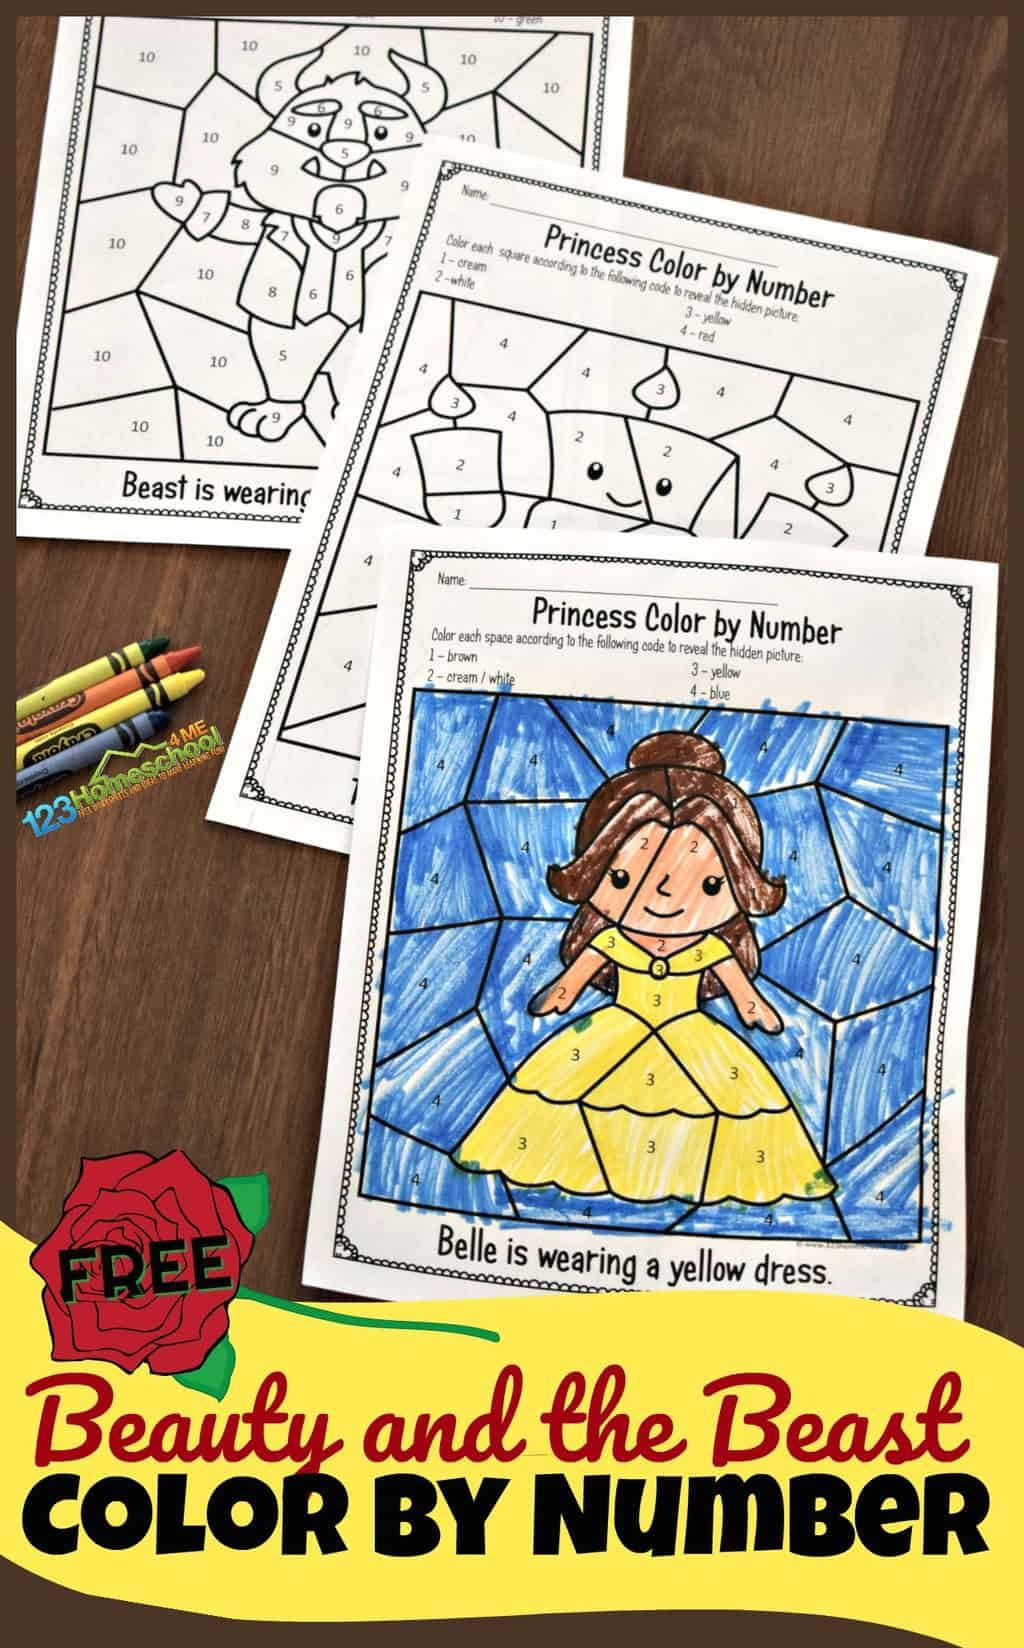 Free Beauty And The Beast Colornumber Worksheets | Hs- Preschool | The Printable Princess Worksheets